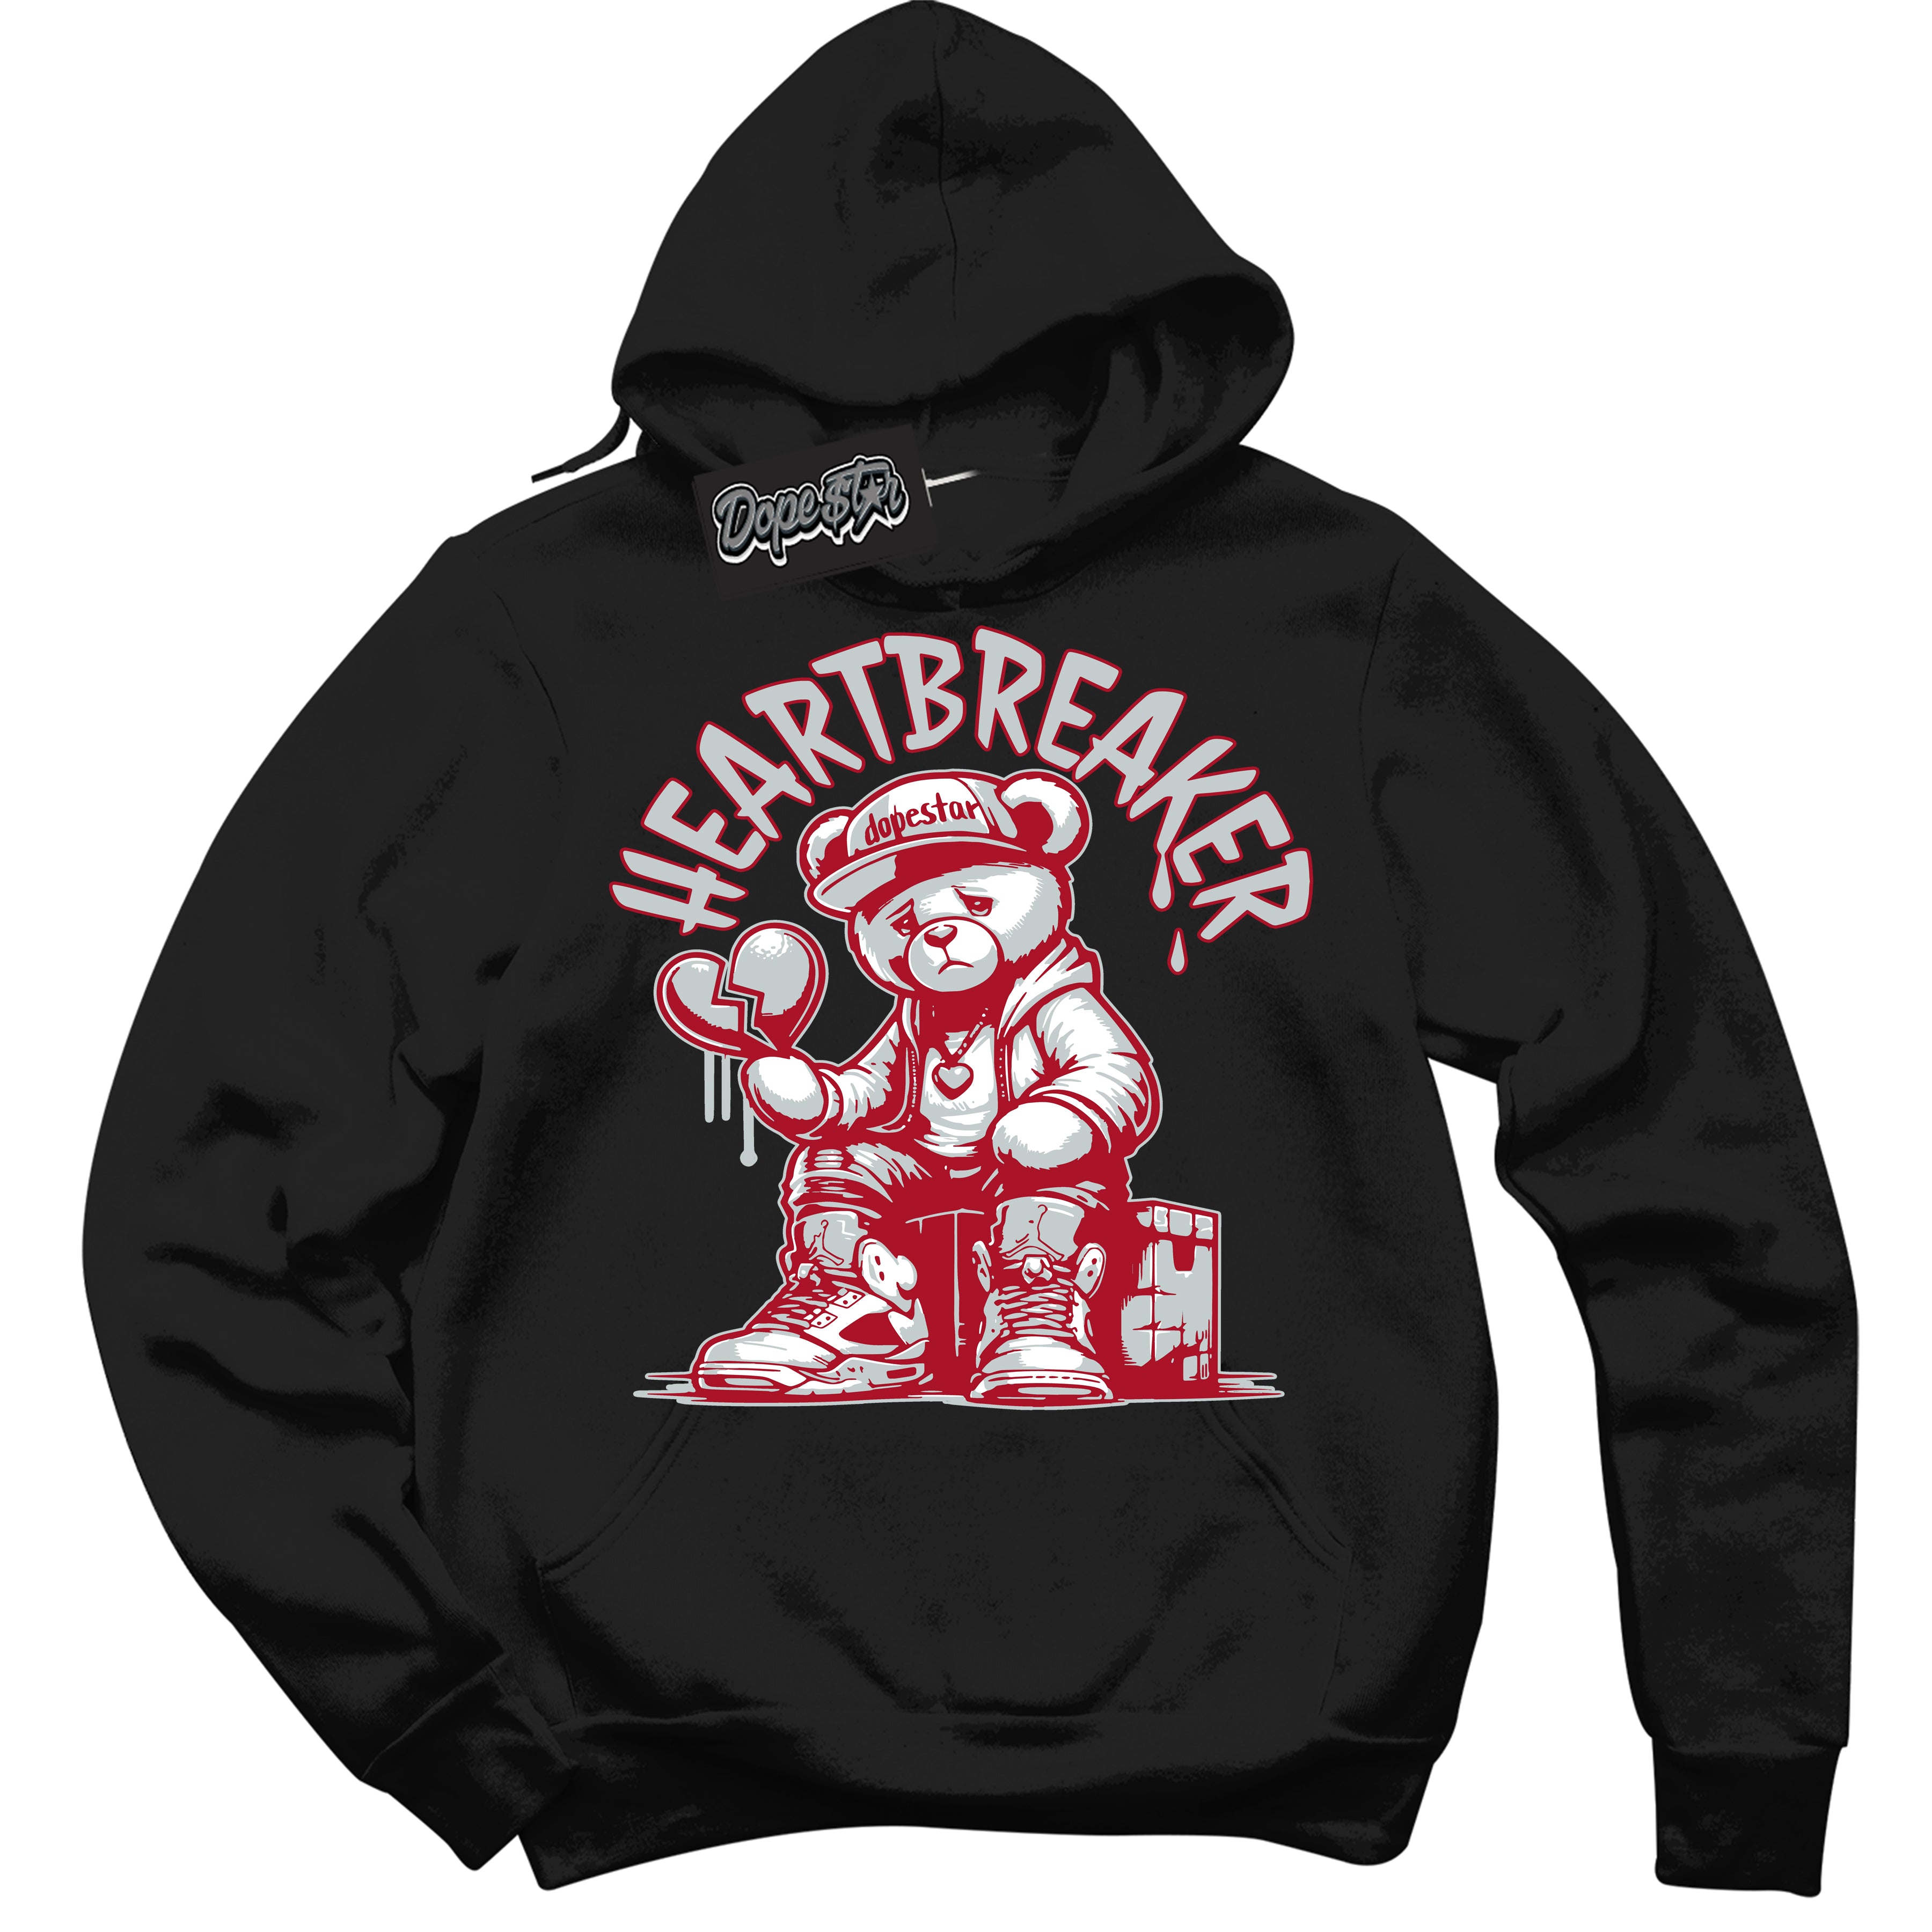 Cool Black Hoodie with “ Heartbreaker Bear ”  design that Perfectly Matches  Reverse Ultraman Sneakers.